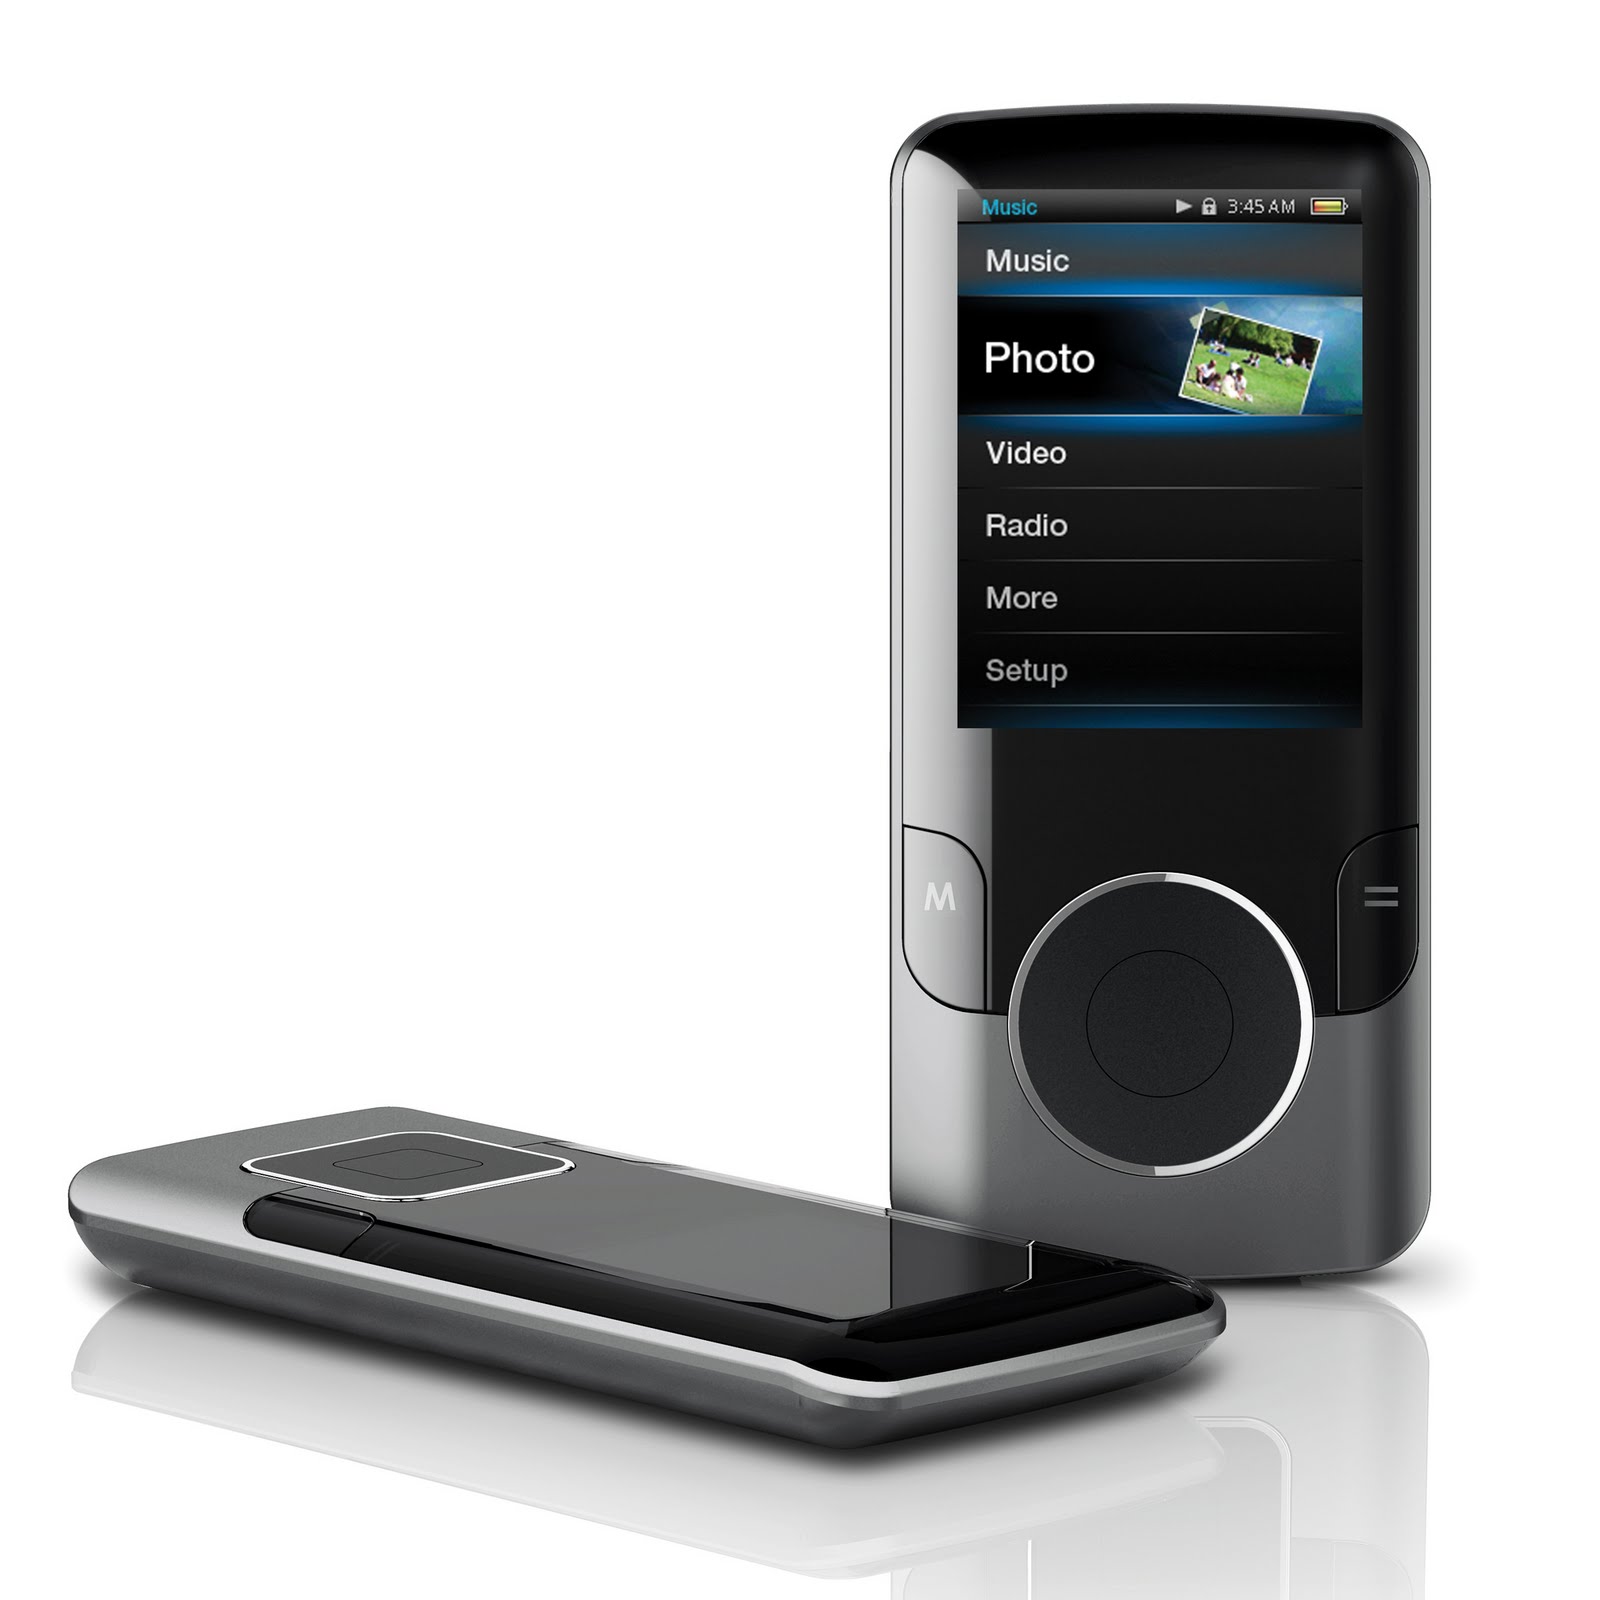  Players Reviews on Coby Mp 707 4gb Mp3 Player Review